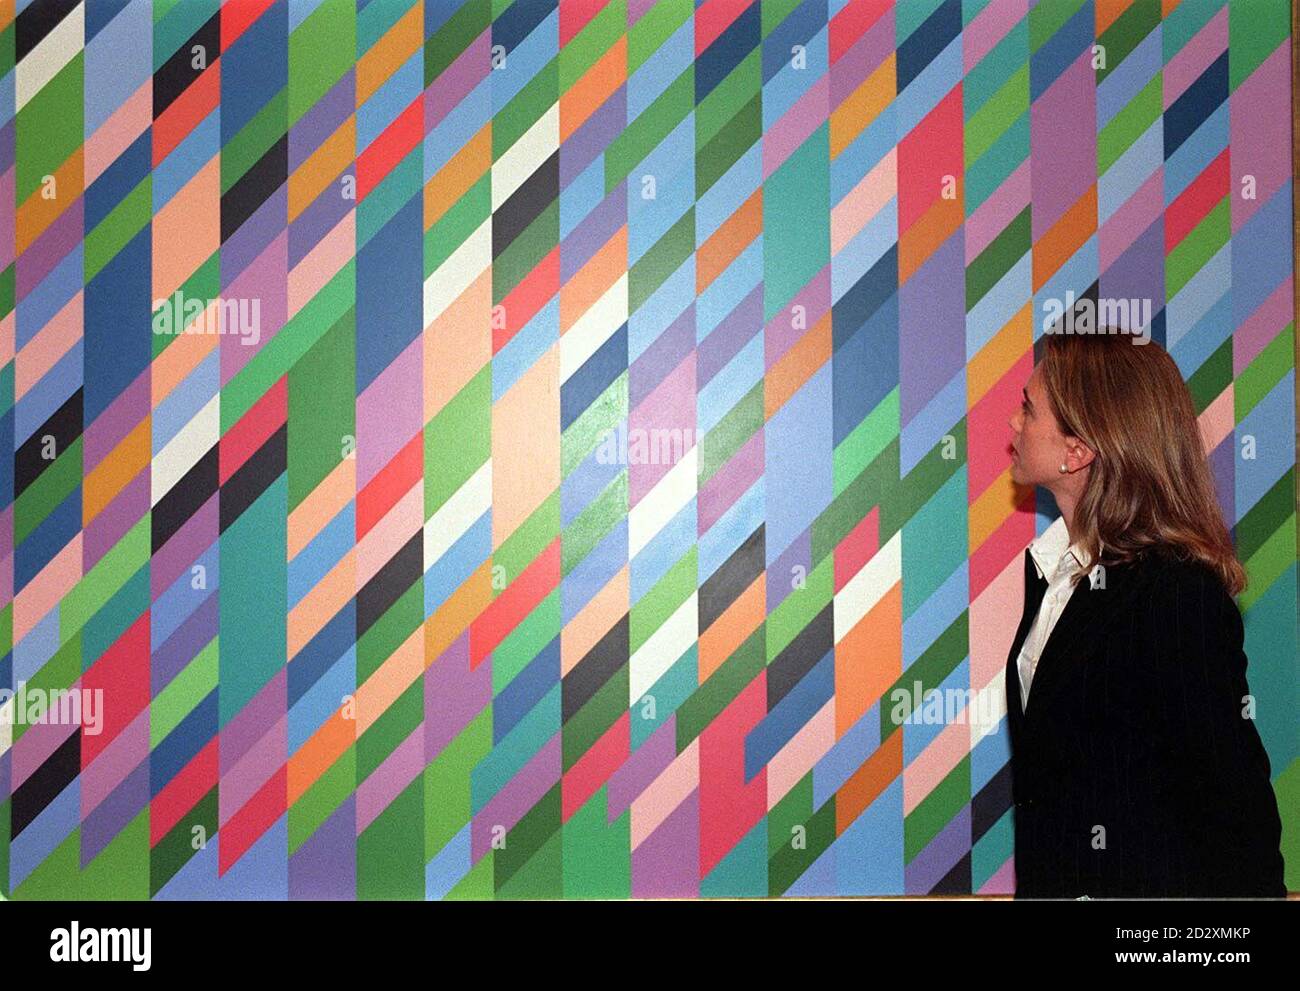 Monica Campos, a specialist of Christies' contemporary art department, admires work by English artist Bridget Riley entitled "Certain Day", in London today (Weds), previewing the Contemporary Art Sale of 20th Century pictures, drawings and sculpture from rock legend Eric Clapton's collection, which hopes to fetch 30,000- 40,000, at the auction with the entire collection estimated at 300,000- 500,000, on May 29. Photo by Helen Tilley. * 2/7/03: An art expert admiring work by English artist Bridget Riley entitled "Certain Day" as Riley and influential film-maker Ken Loach were among five Stock Photo